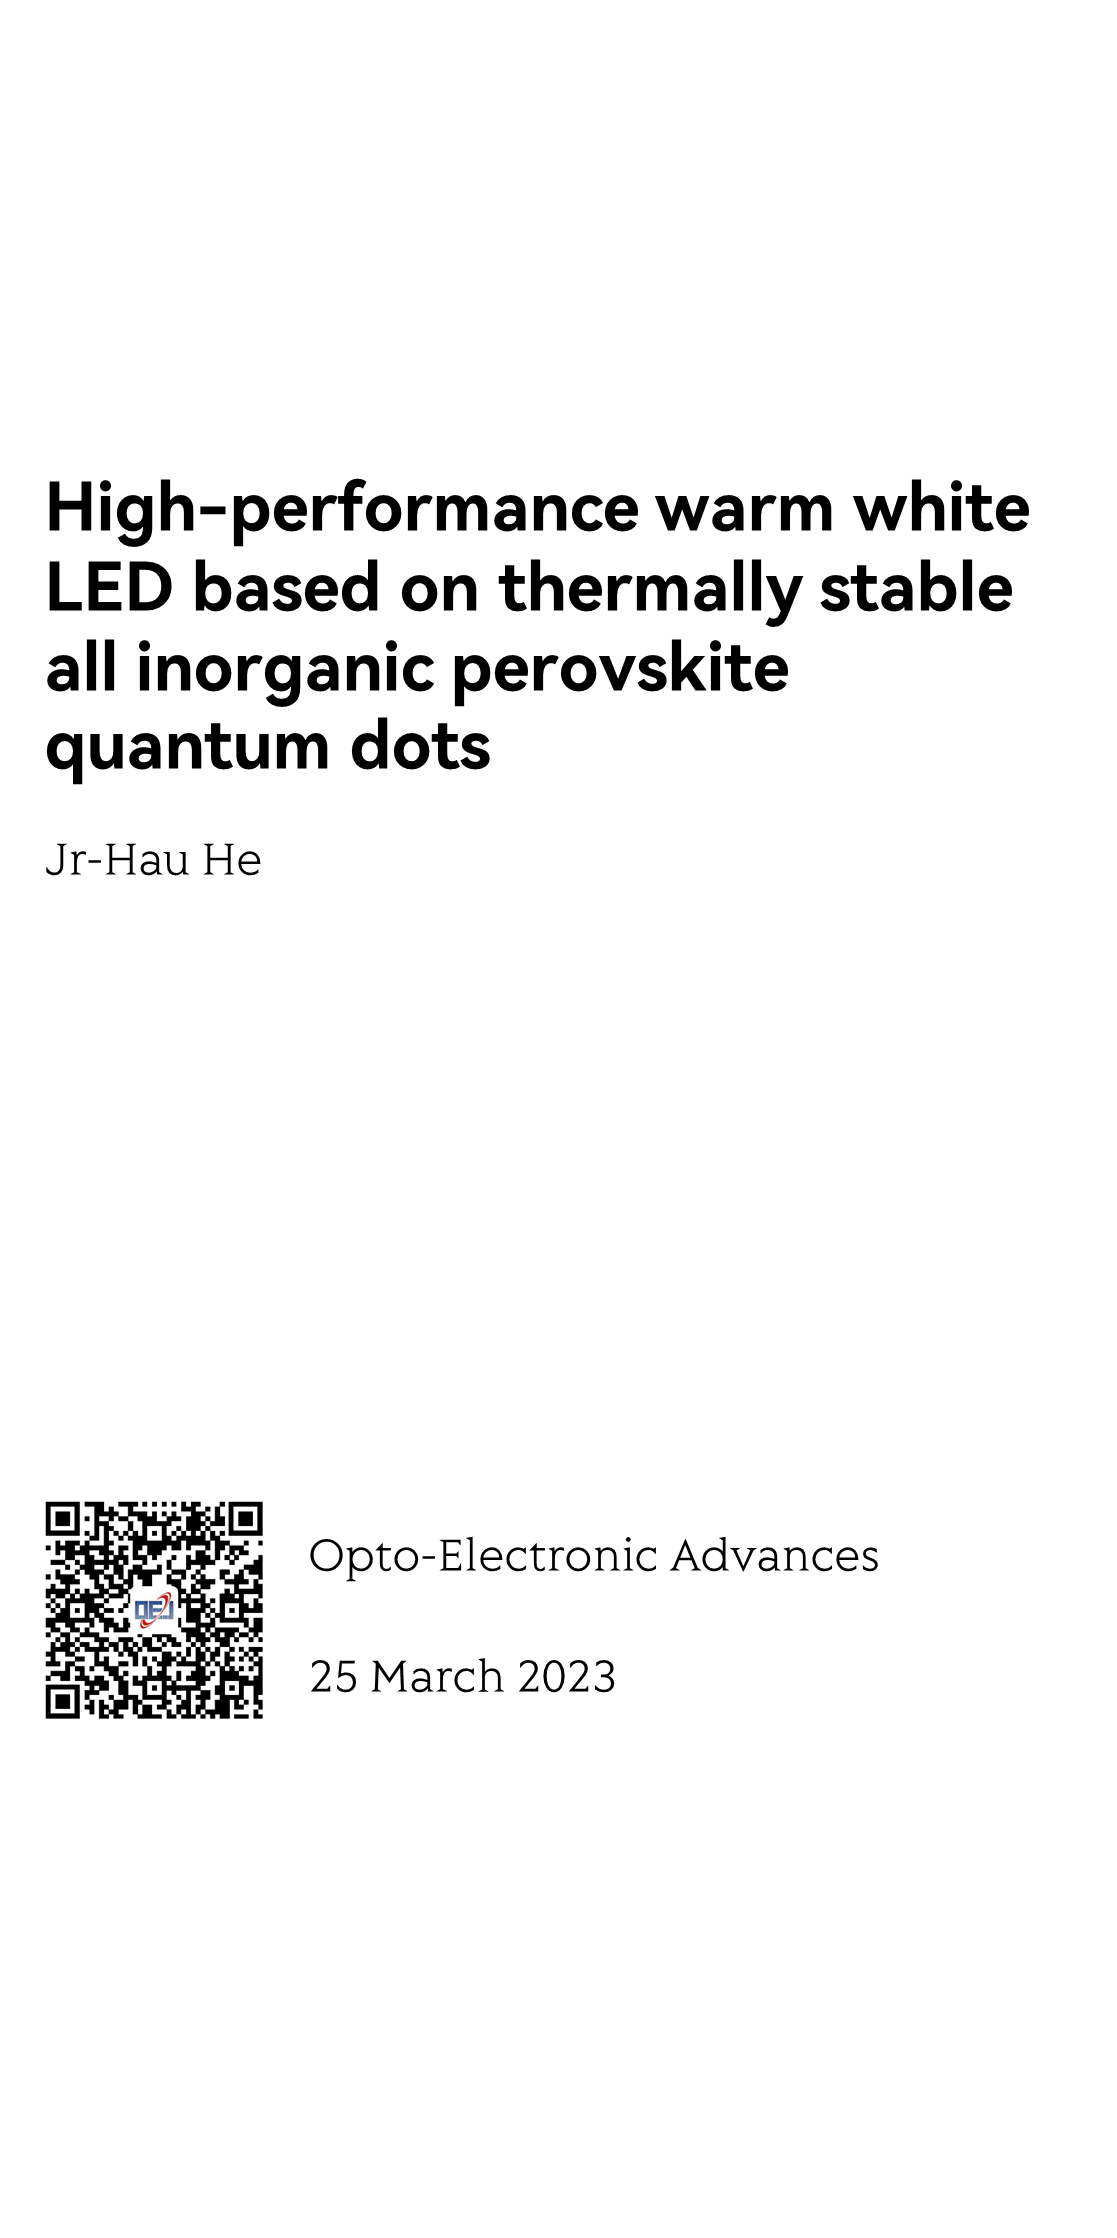 High-performance warm white LED based on thermally stable all inorganic perovskite quantum dots_1